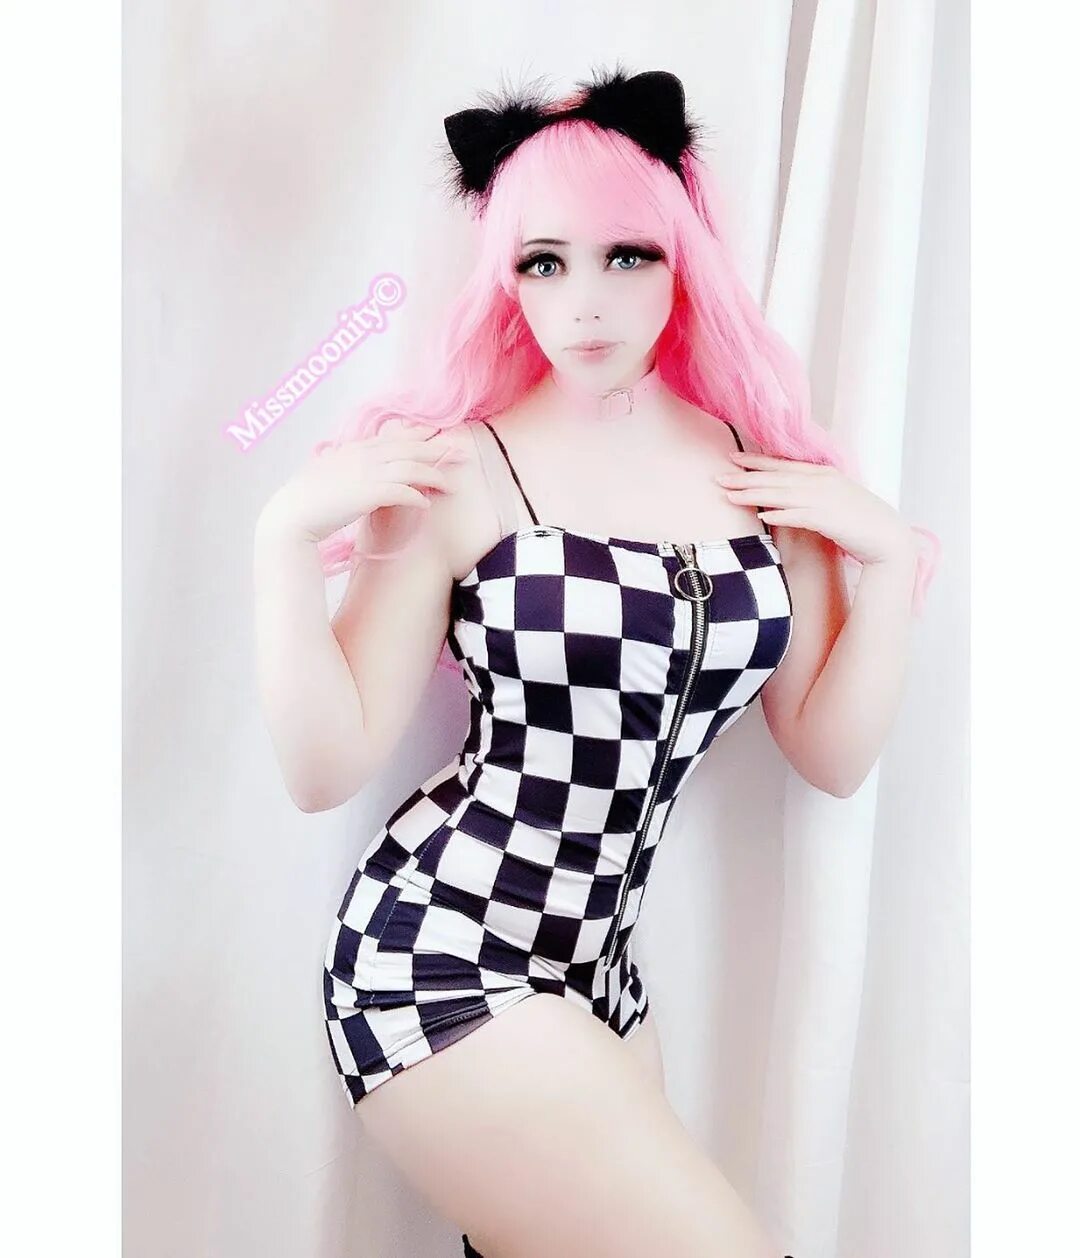 Living Doll / Cosplay Model в Instagram: "💗 How did you find my accou...